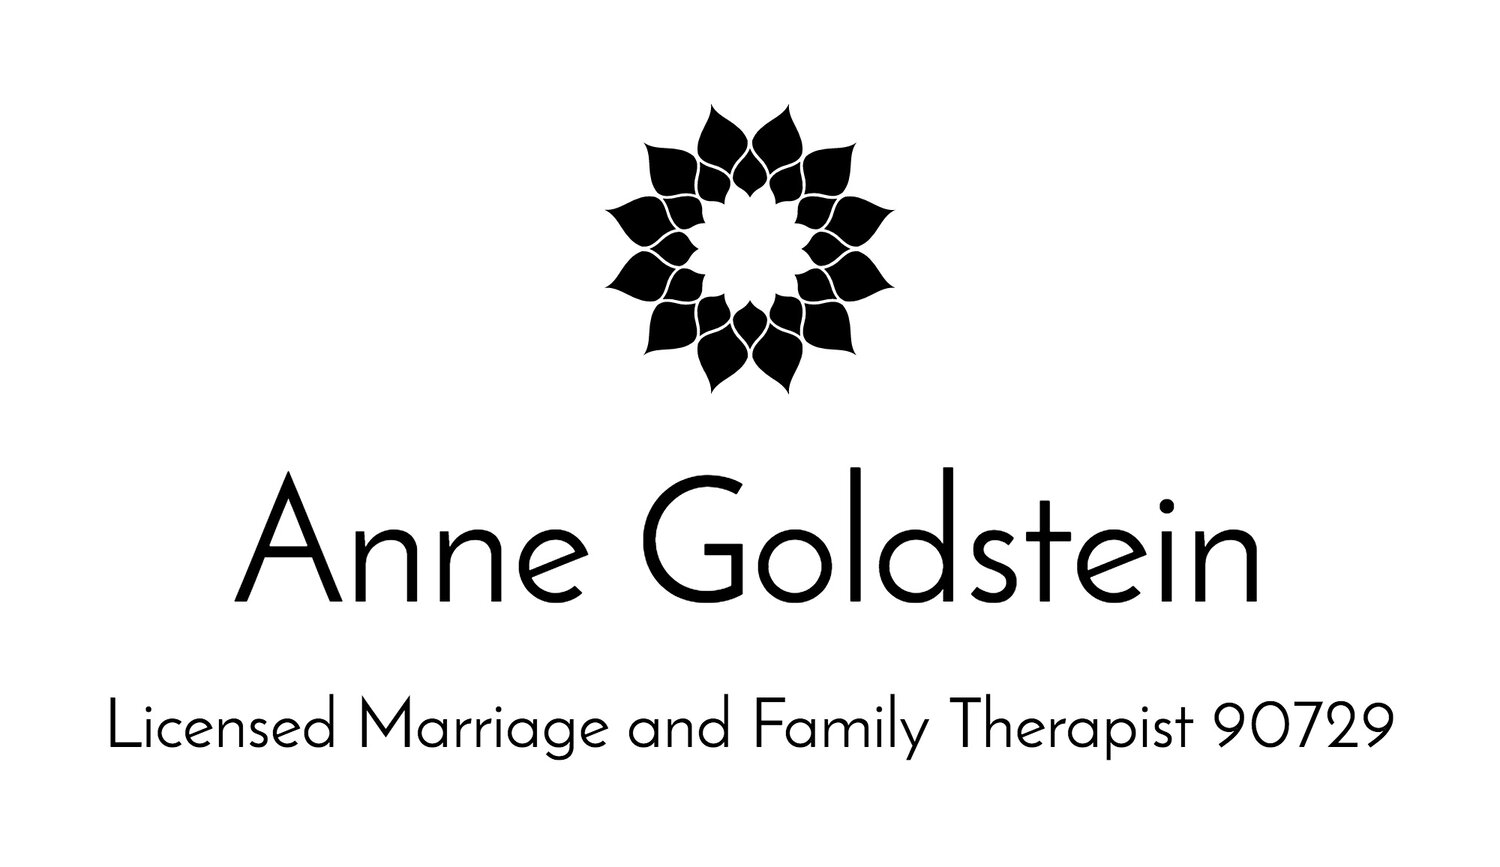 Annie Goldstein,  Licensed Marriage and Family Therapist 90729